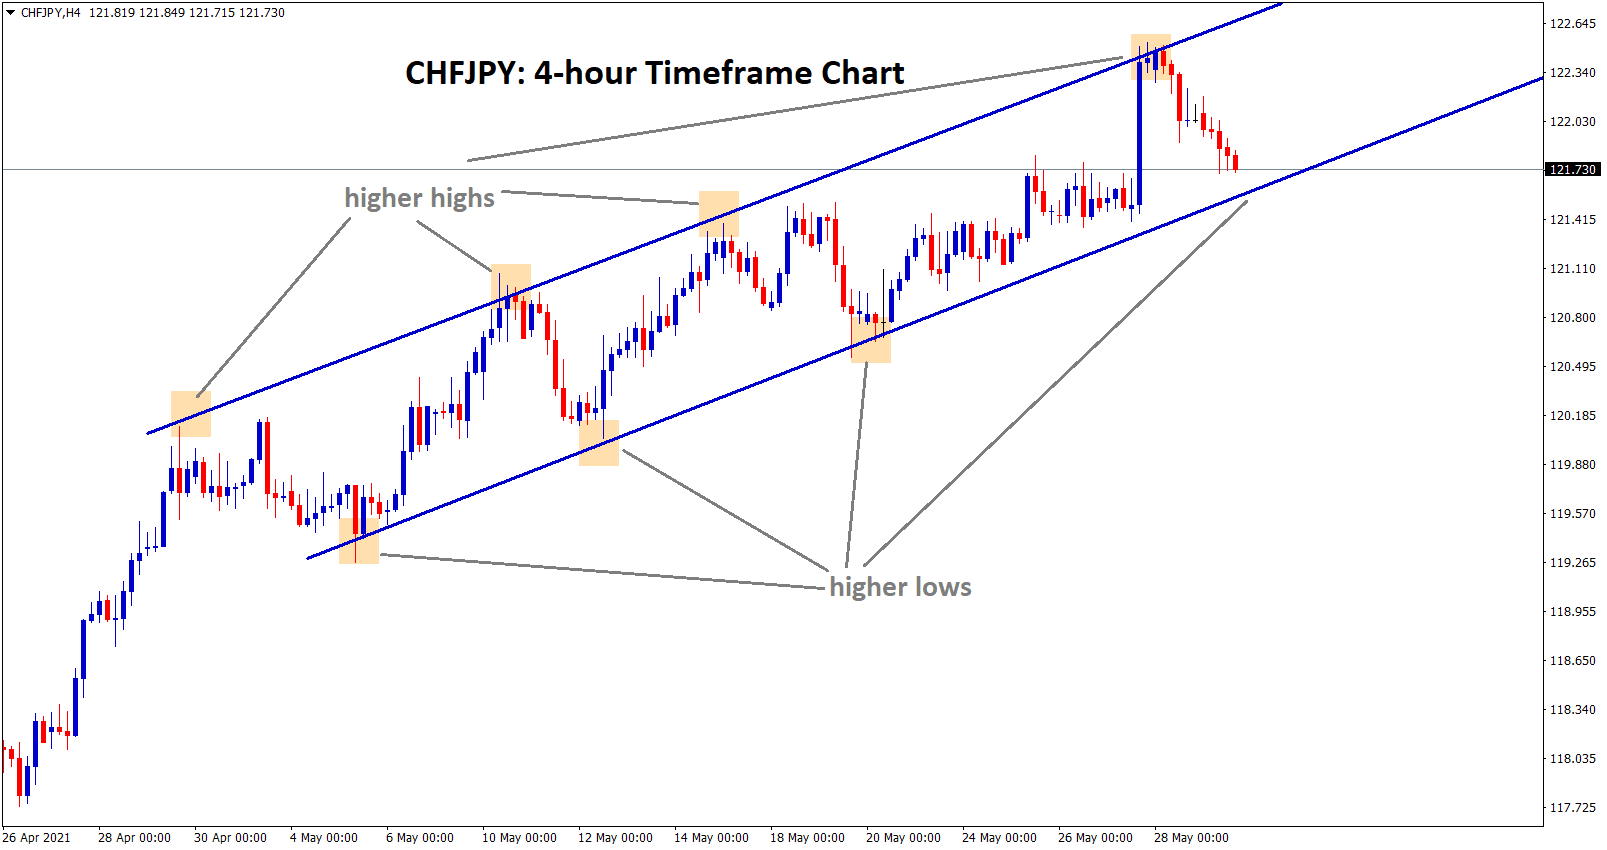 chfjpy going to reach the higher low zone of the uptrend line